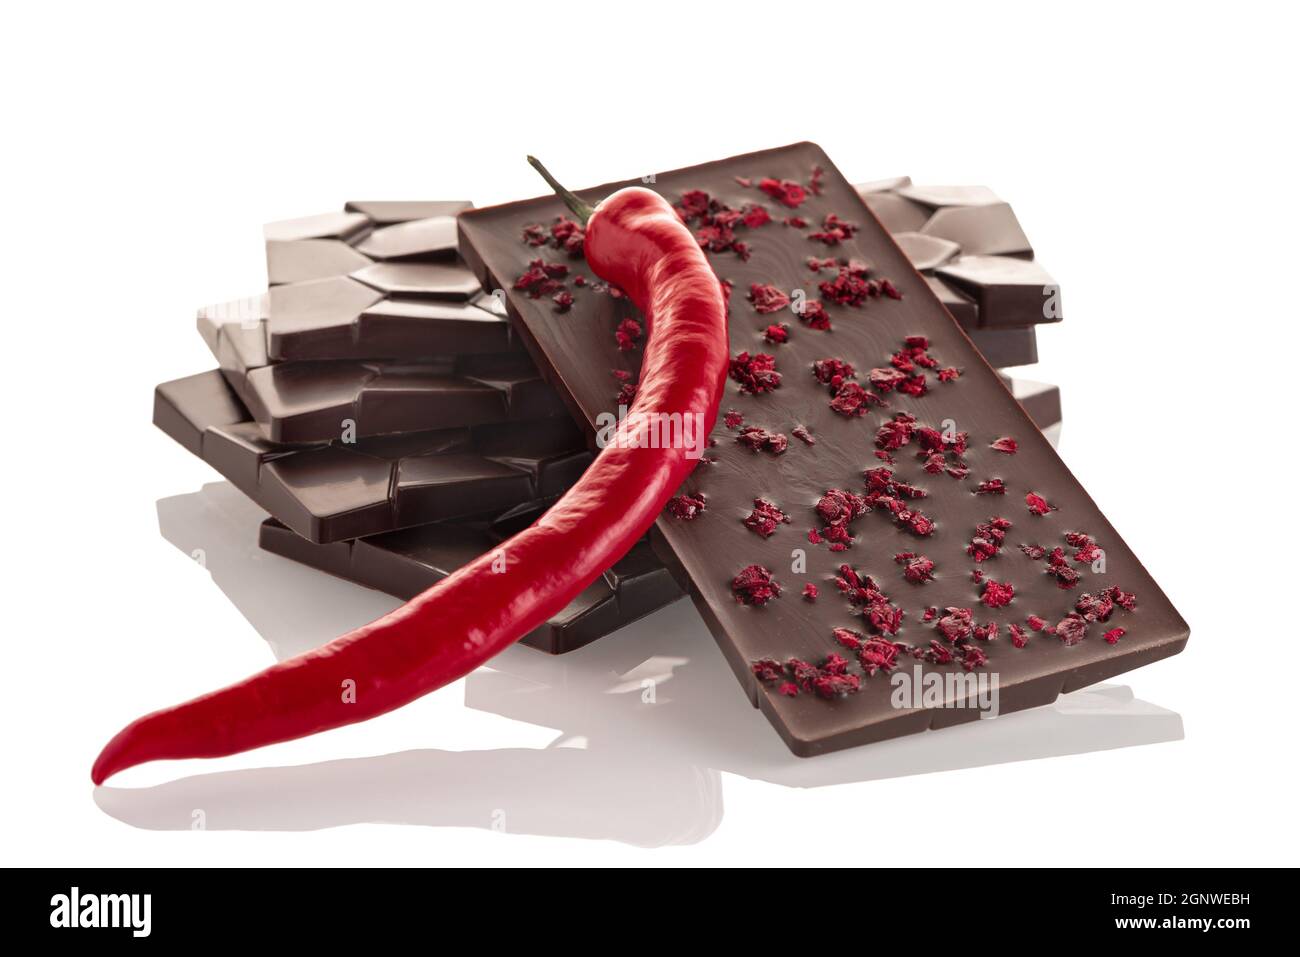 Dark raw chocolate with chili pepper and freeze-dried cherries on a white background. Stock Photo